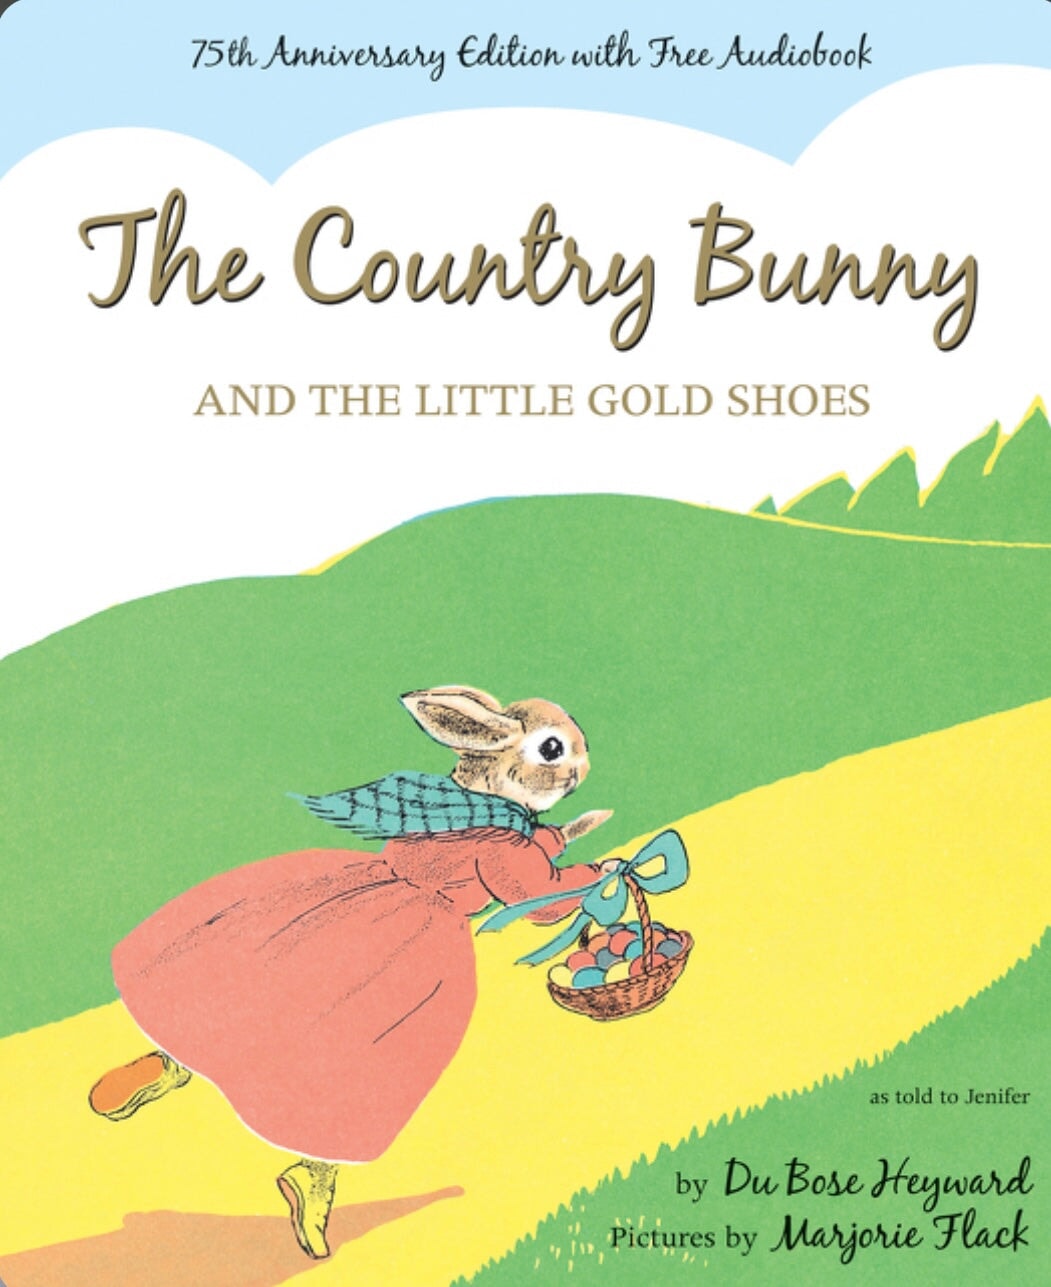 The Country Bunny and the Little Gold Shoes, 75th Anniversary Edition